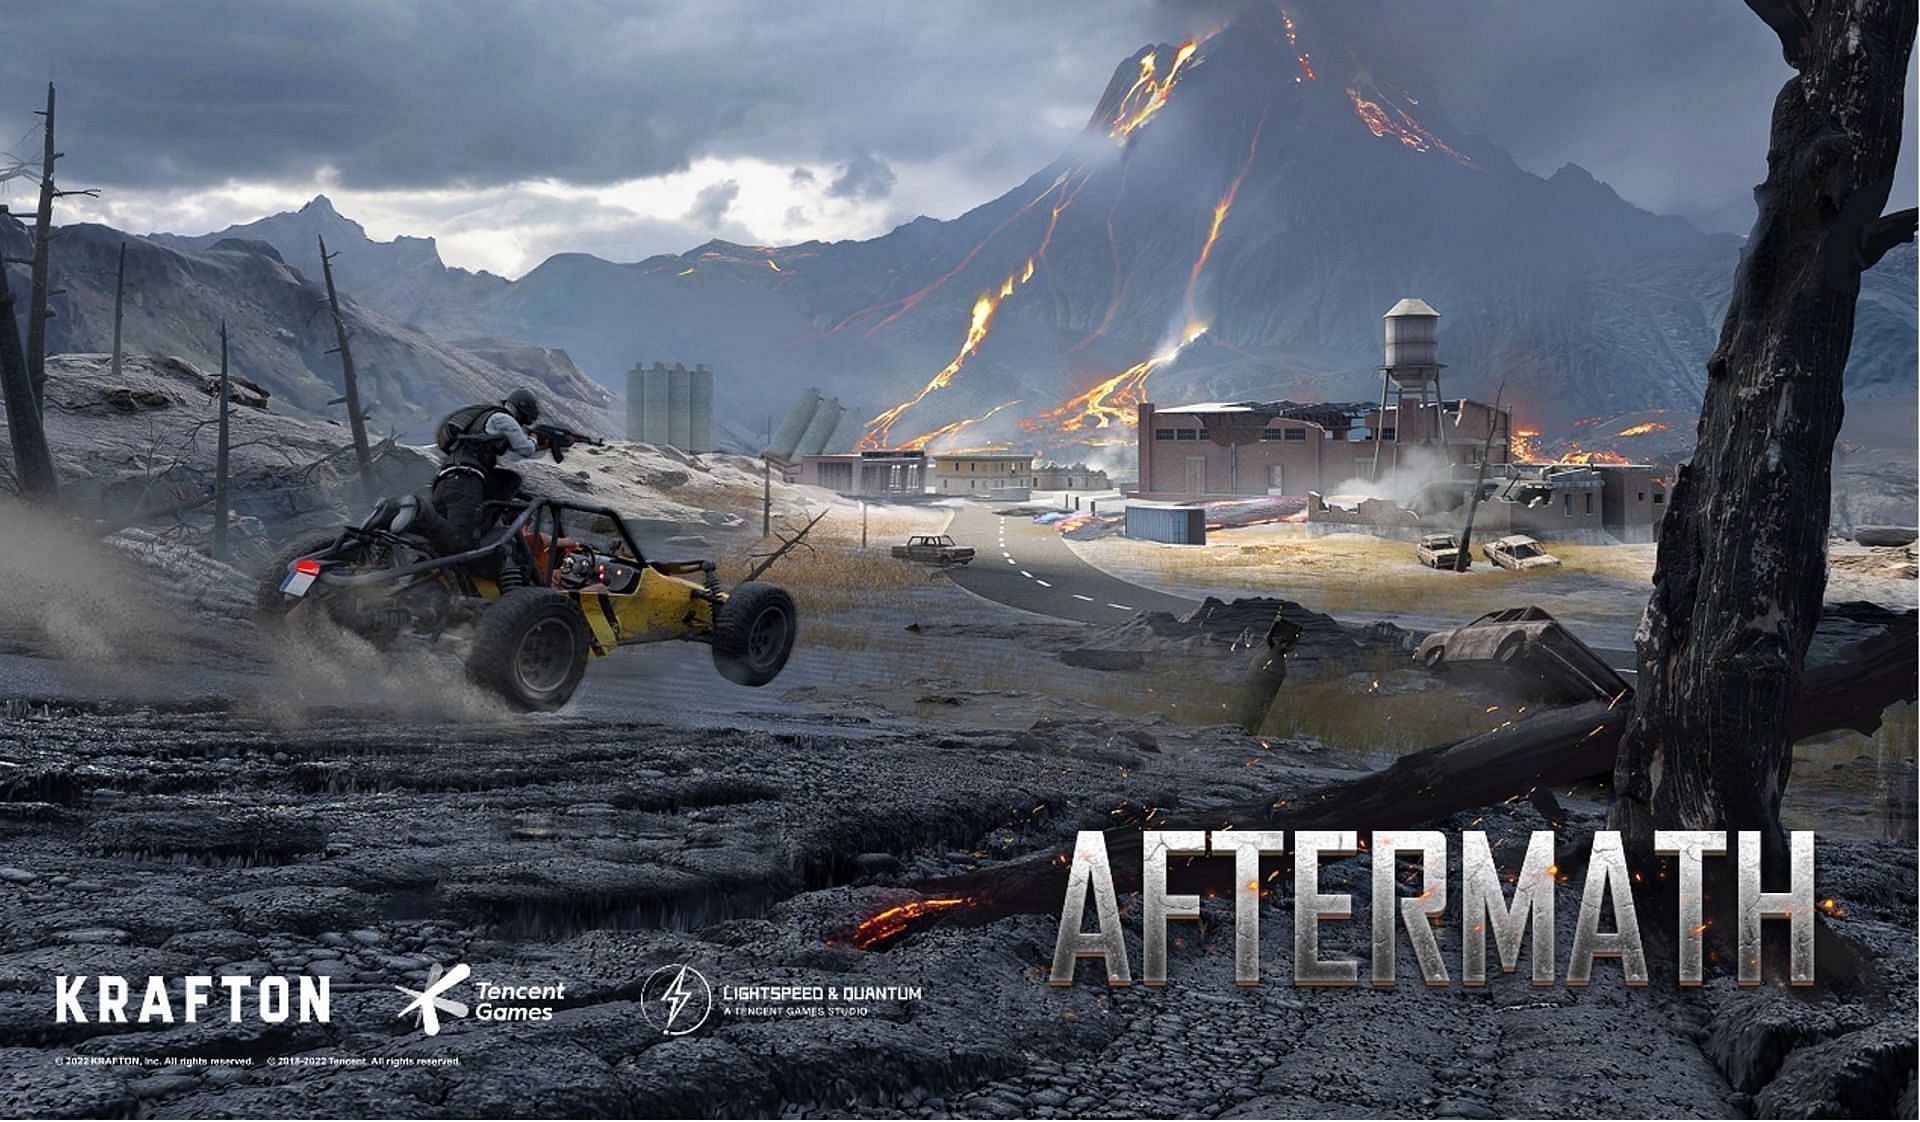 Experiencing the Aftermath map on 1.8 update in BGMI (Image via Krafton)